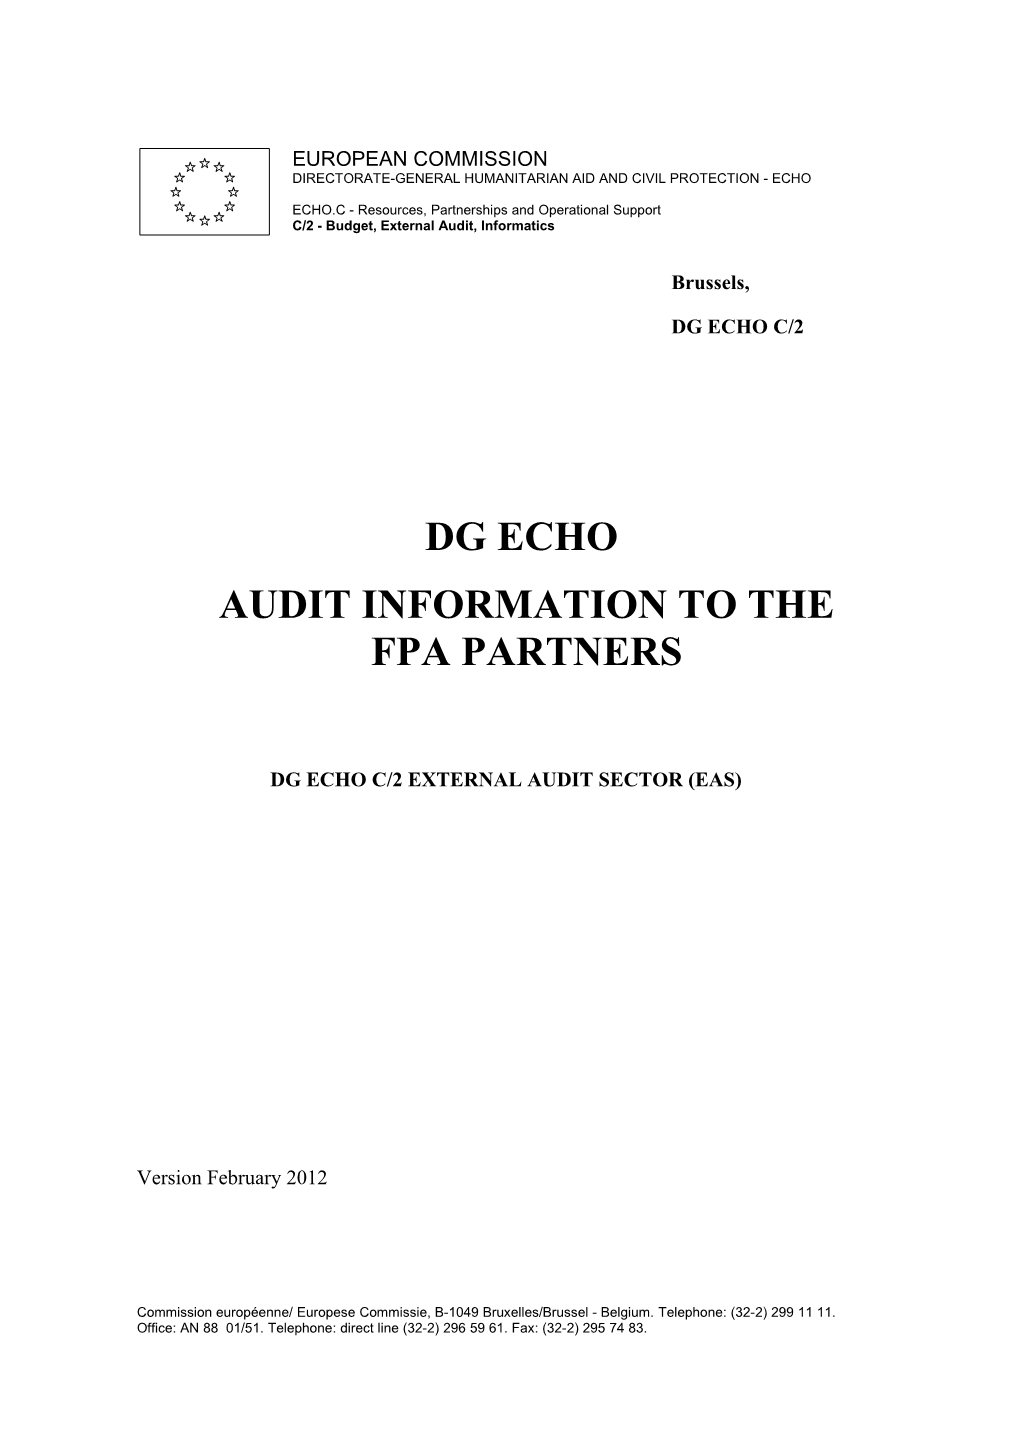 Audit Information to the Fpa Partners